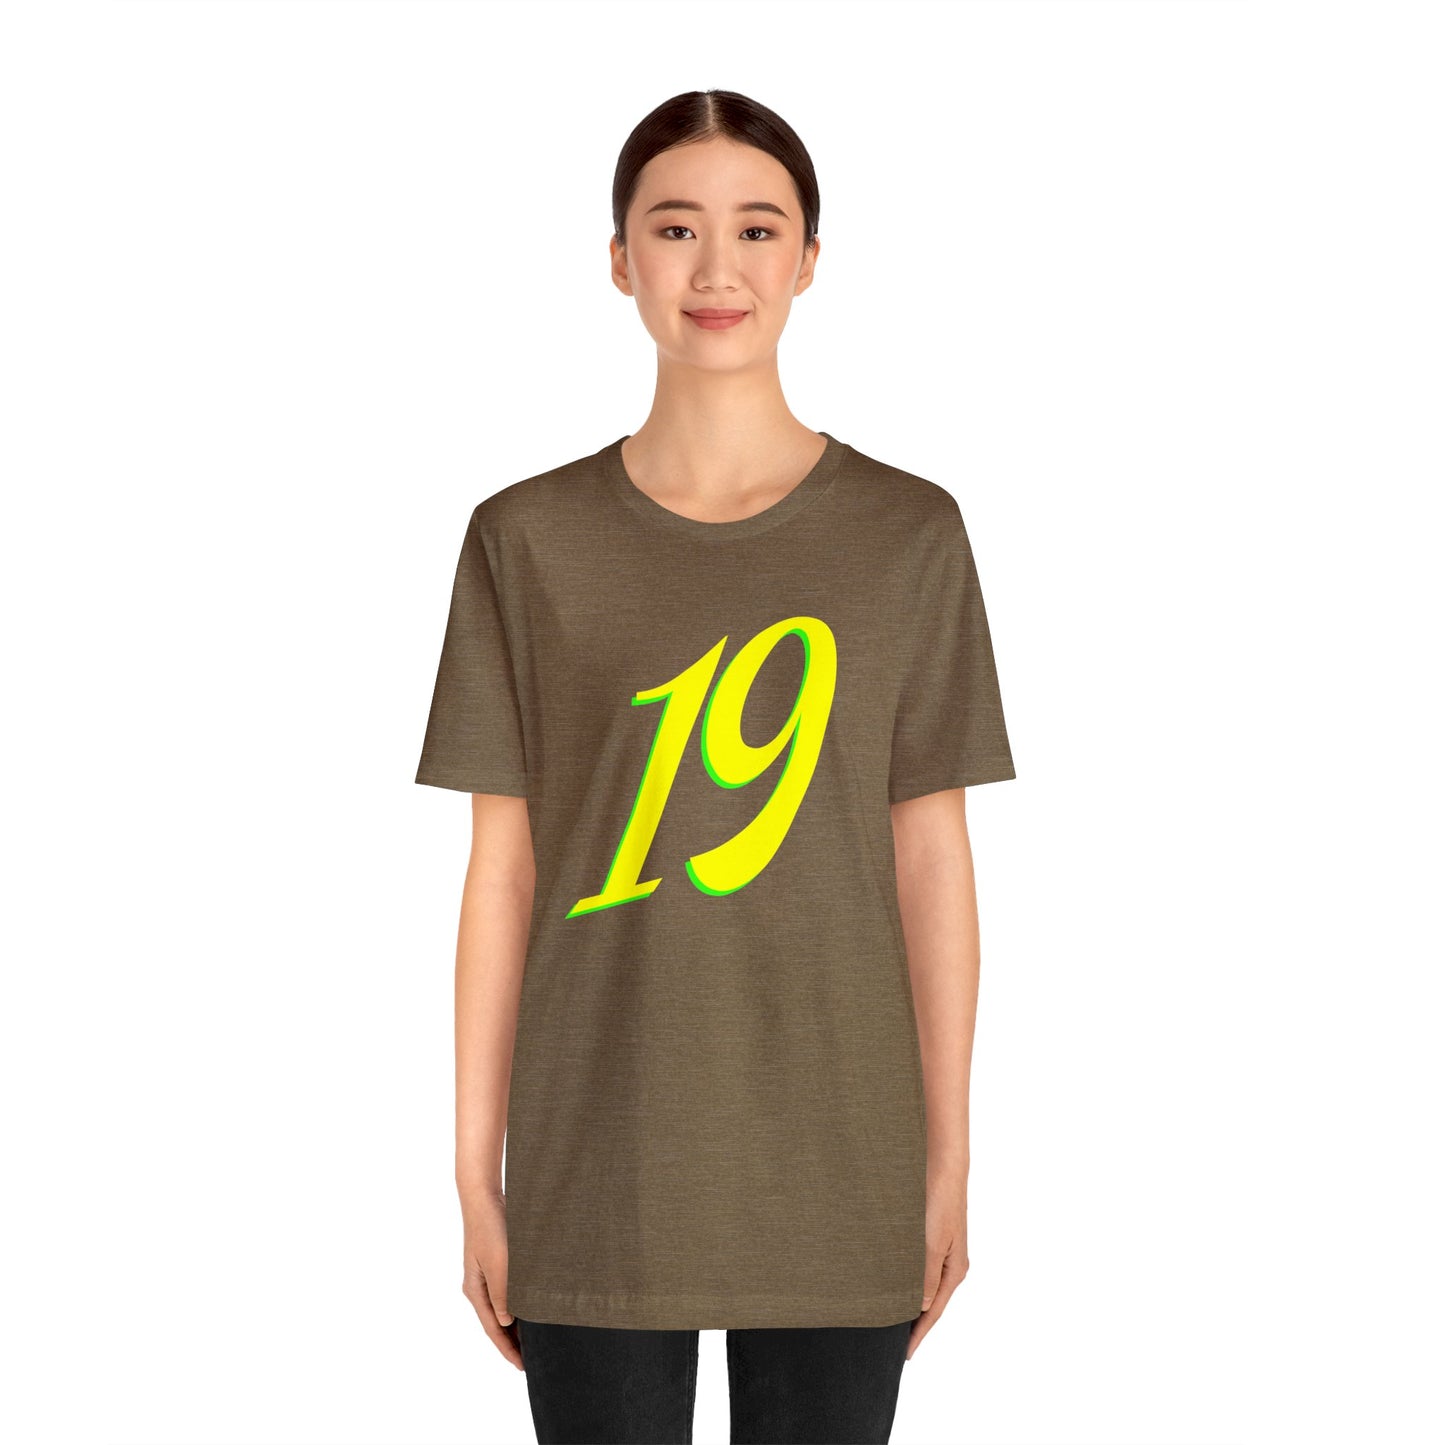 Number 19 Design - Soft Cotton Tee for birthdays and celebrations, Gift for friends and family, Multiple Options by clothezy.com in Dark Grey Heather Size Medium - Buy Now